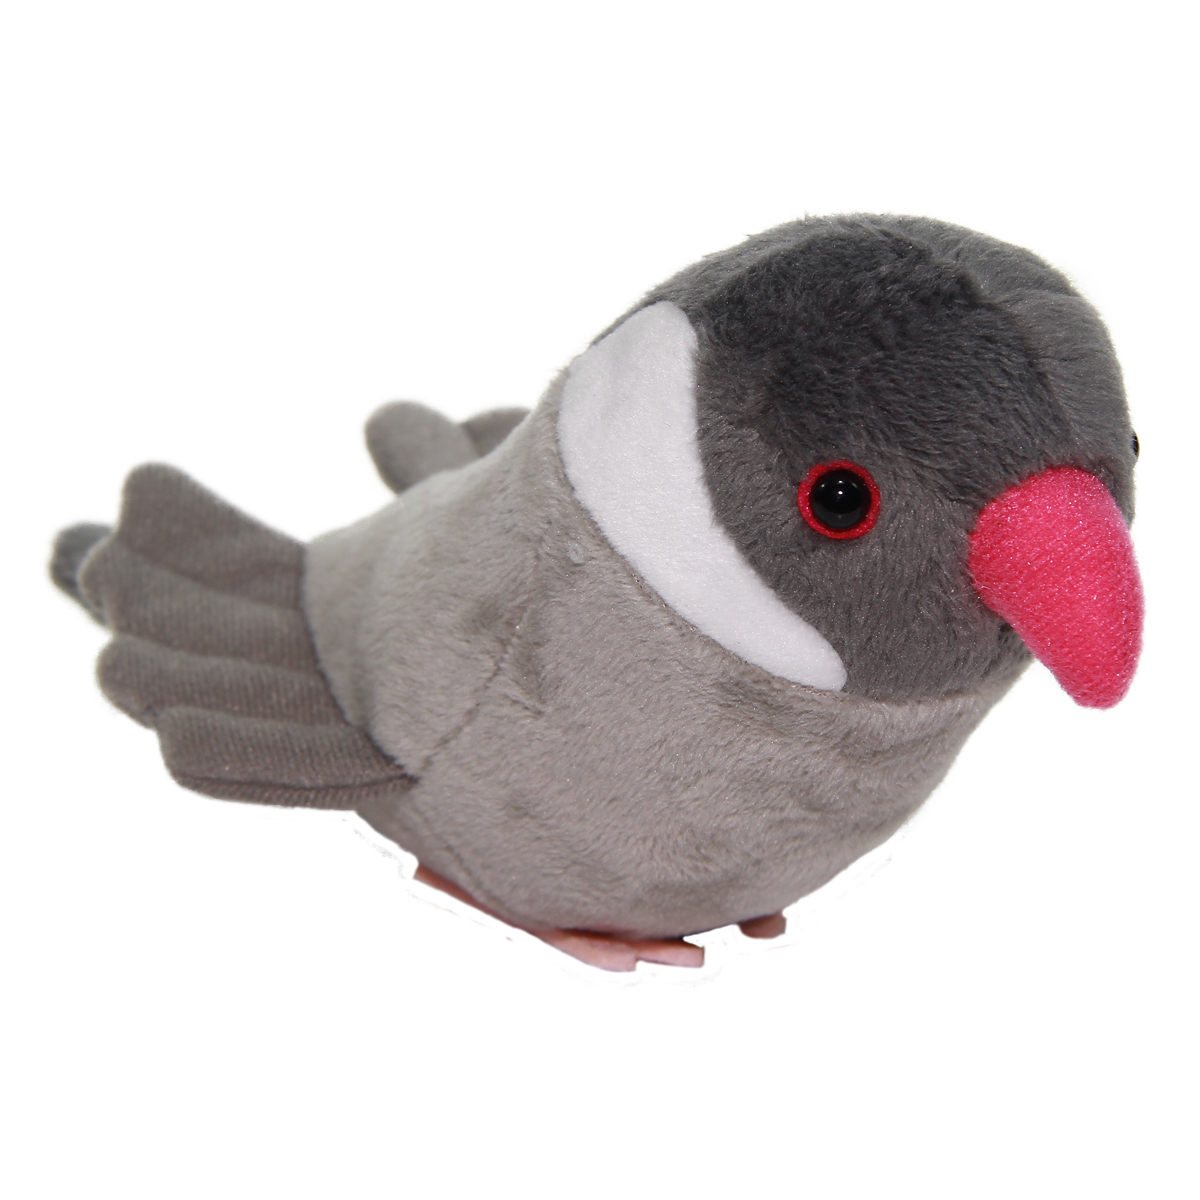 Java Sparrow Plush Doll, Cute Birds Collection, Stuffed Animal Toy, Gray, 6 Inches